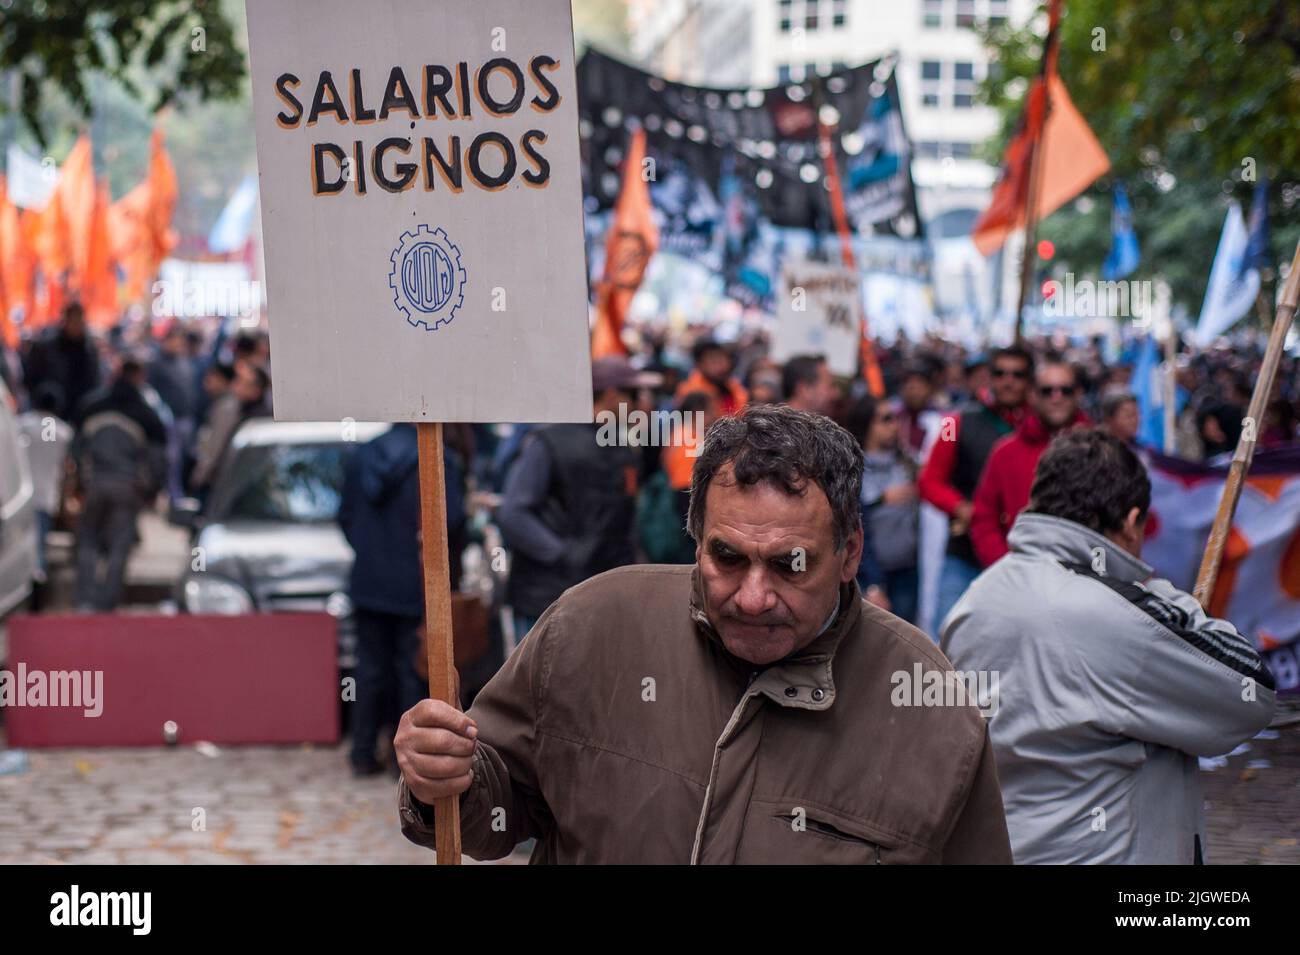 A man carrying a placard demanding decent salaries during a Workers Day Rally in Buenos Aires, Argentina Stock Photo